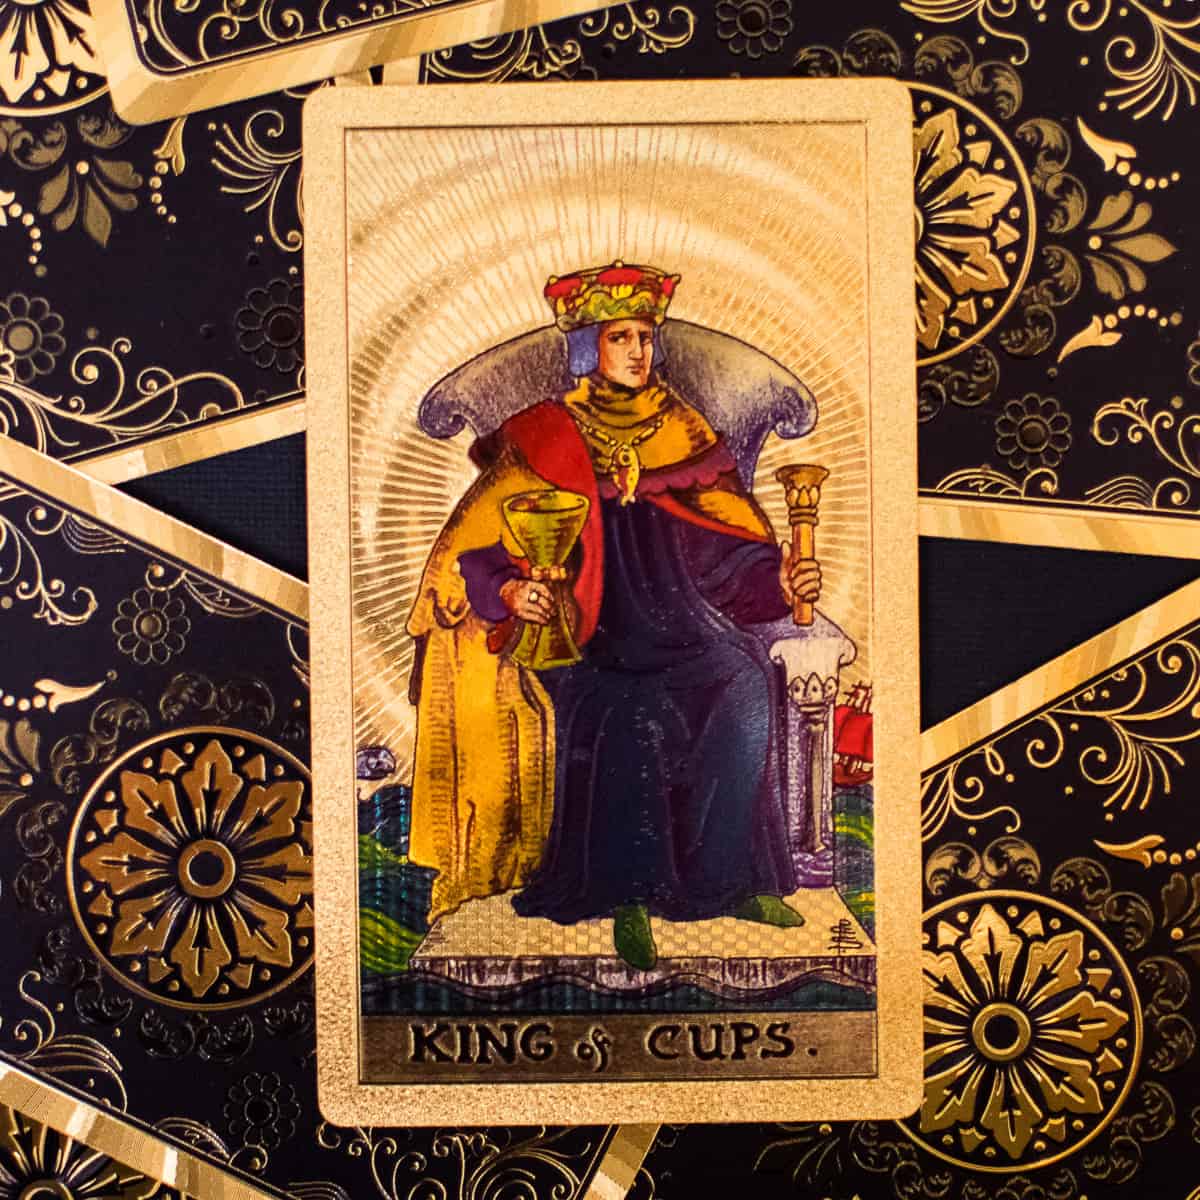 A king sitting on a throne holding a golden cup on a tarot card.